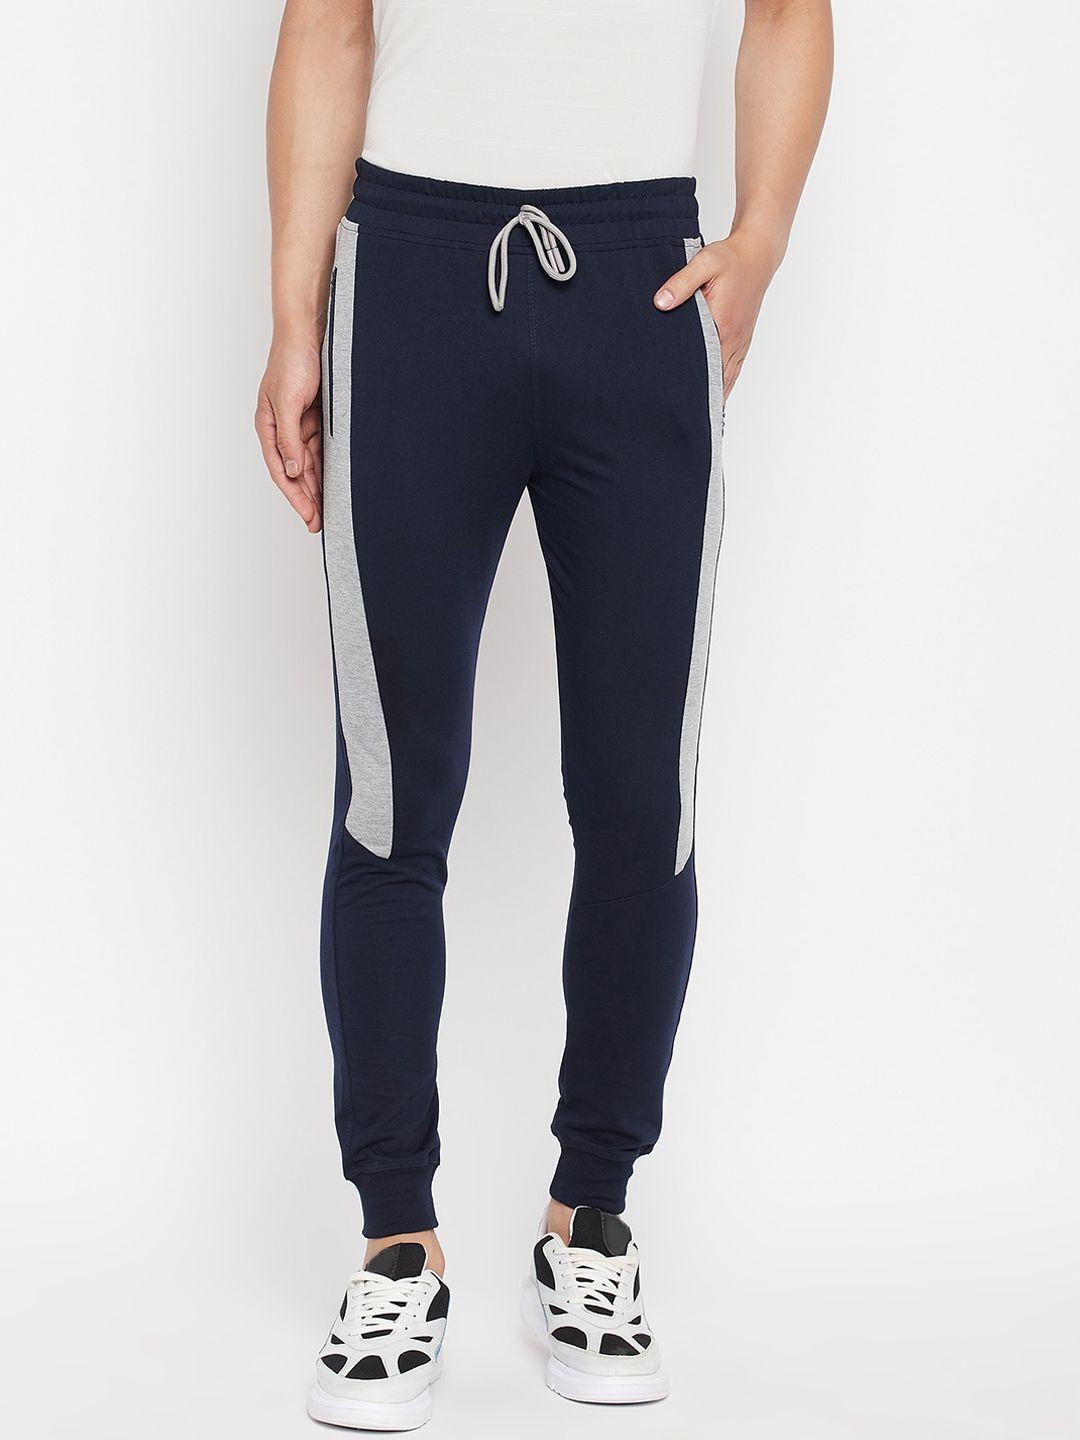 firstkrush men navy blue solid track pants